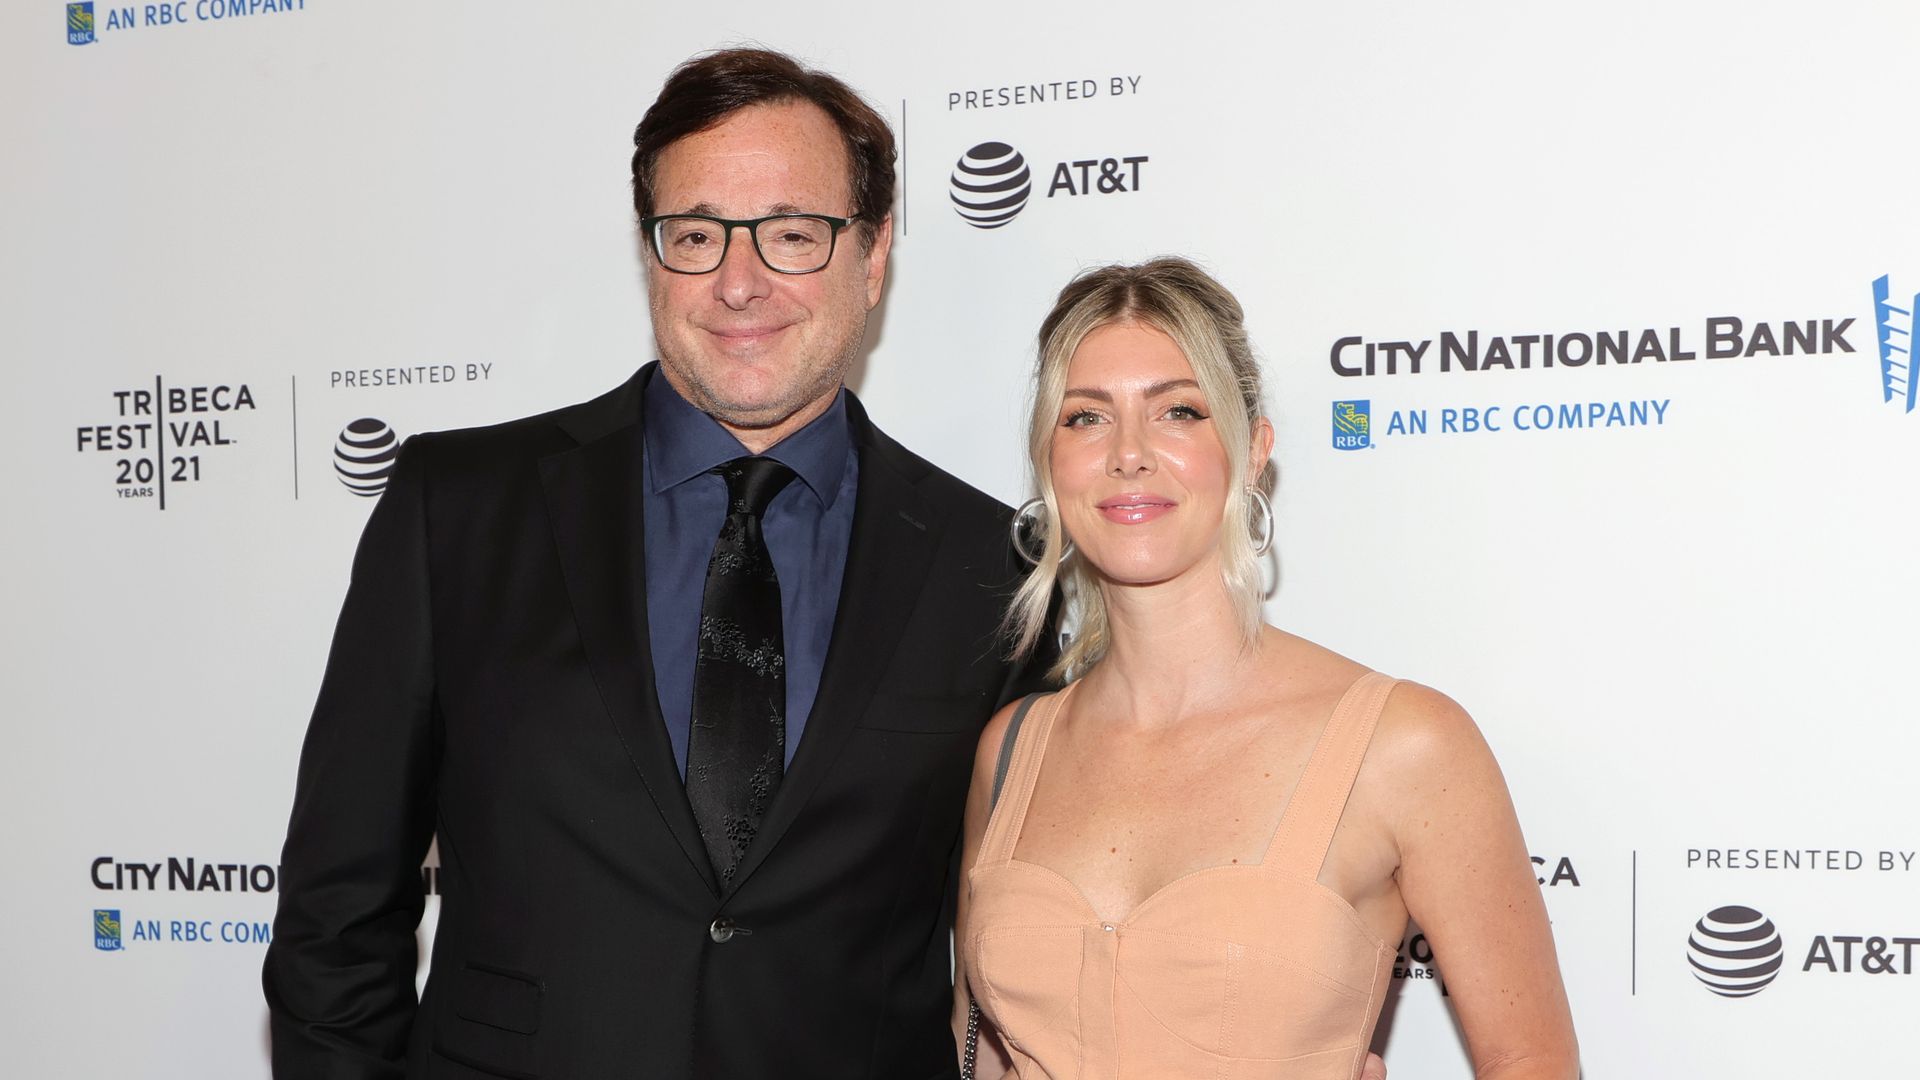 Bob Saget and Kelly Rizzo attend the "Untitled: Dave Chappelle Documentary" Premiere during the 2021 Tribeca Festival at Radio City Music Hall on June 19, 2021 in New York City